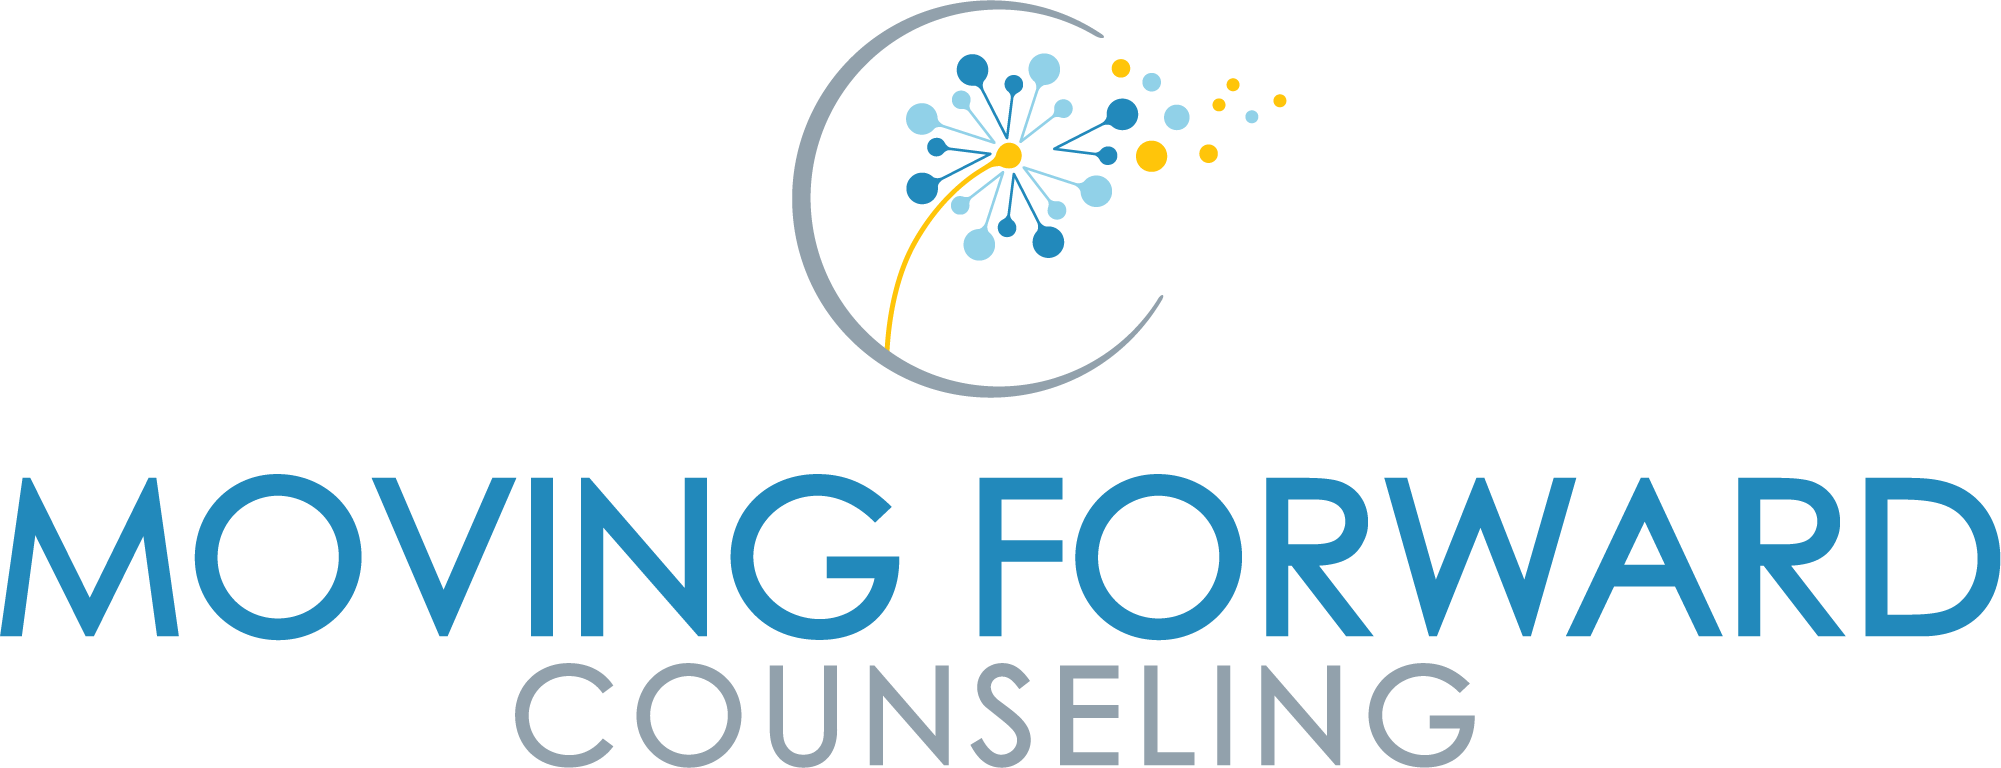 Moving Forward Counseling